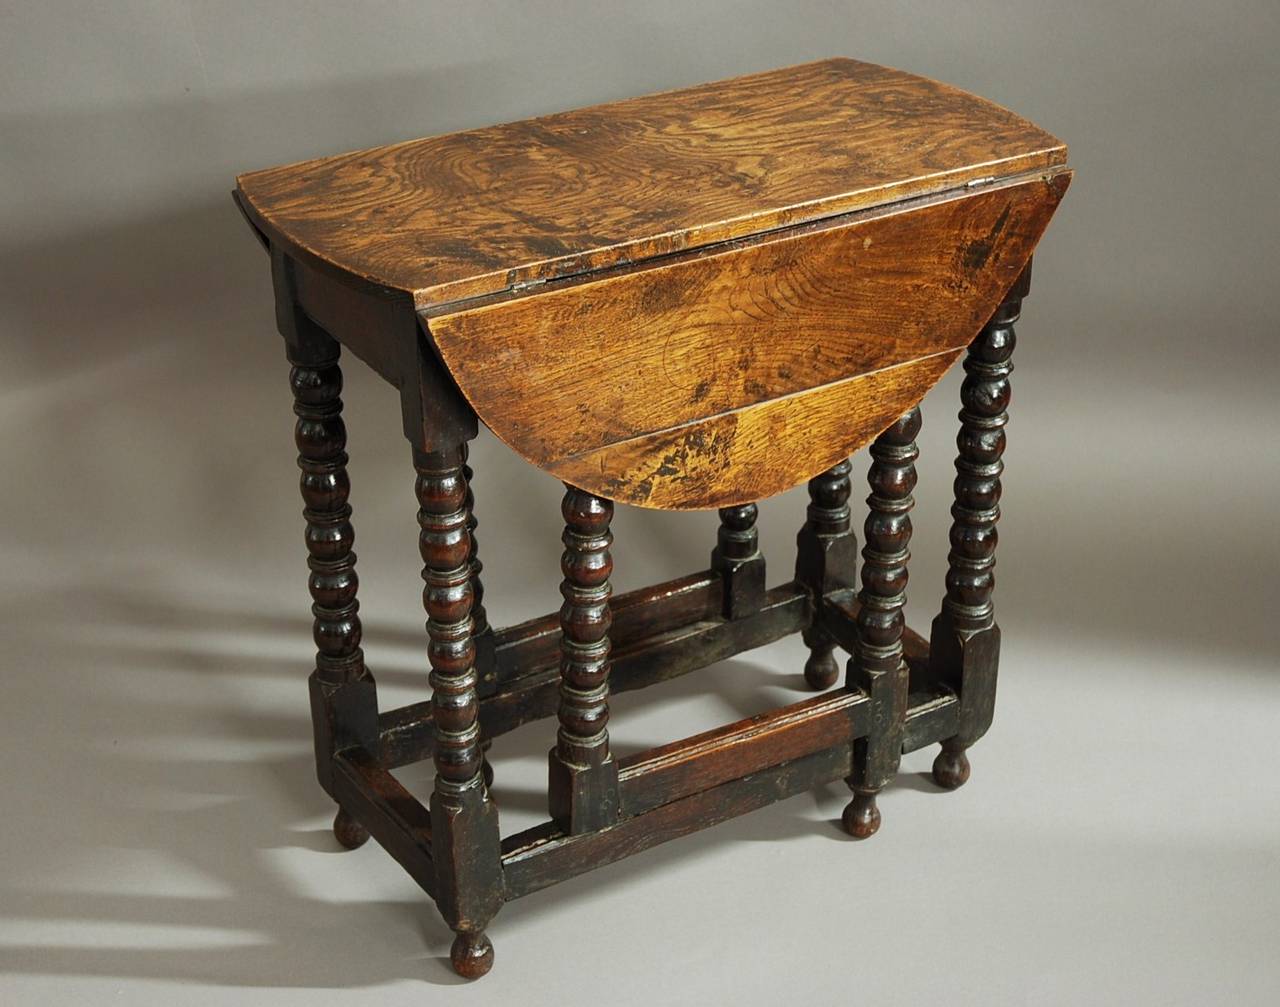 An extremely rare late 17th century oak and elm gateleg table of small proportions and superb patina from the William & Mary period.

This table consists of a well figured elm top of superb patina (color) leading down to an oak base with bobbin